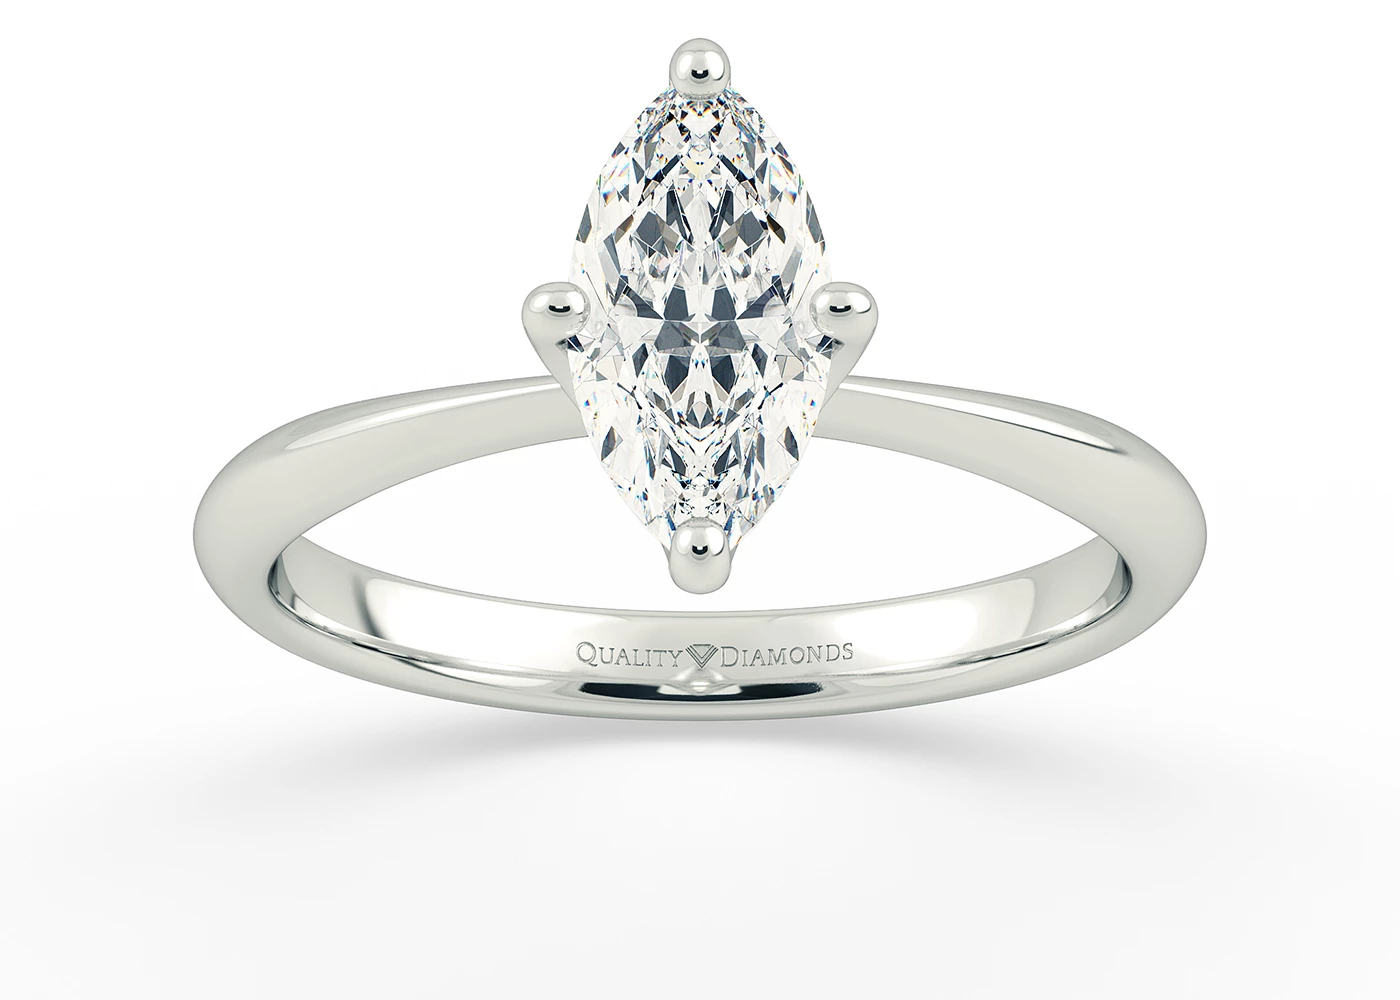 Two Carat Marquise Solitaire Diamond Engagement Ring in 9K White Gold